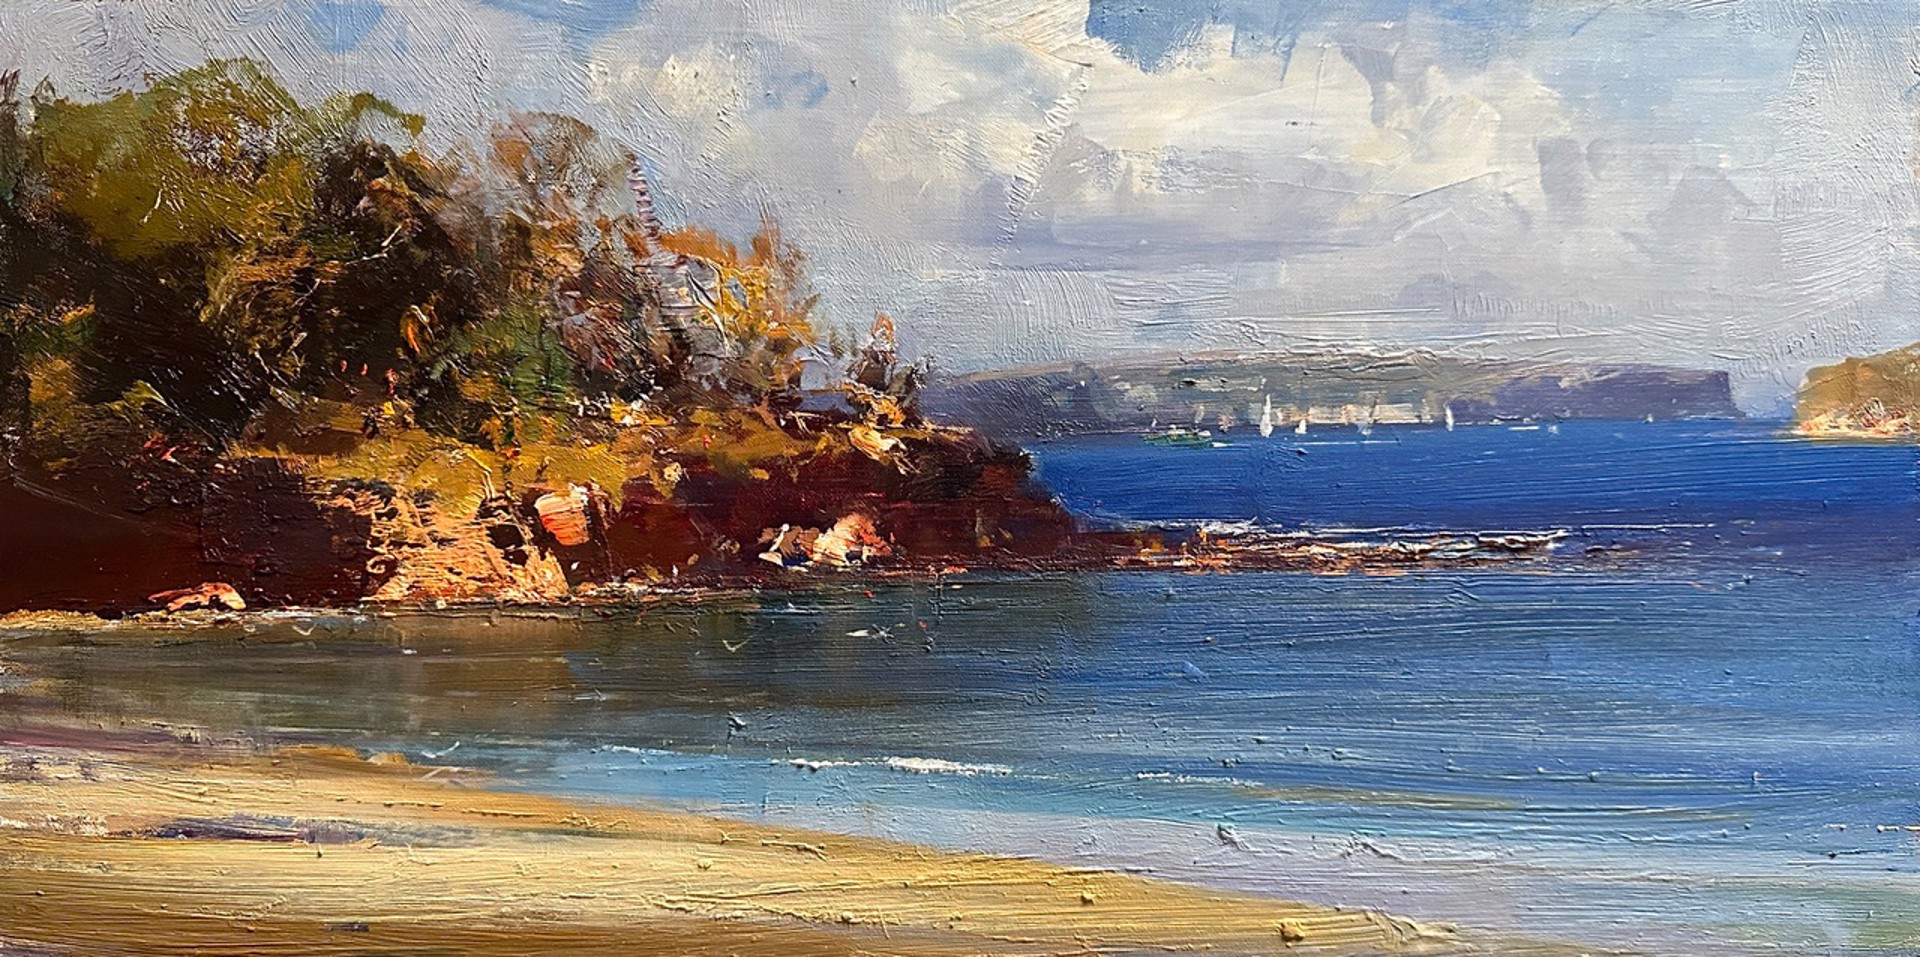 Painting of Balmoral Beach by Ken Knight